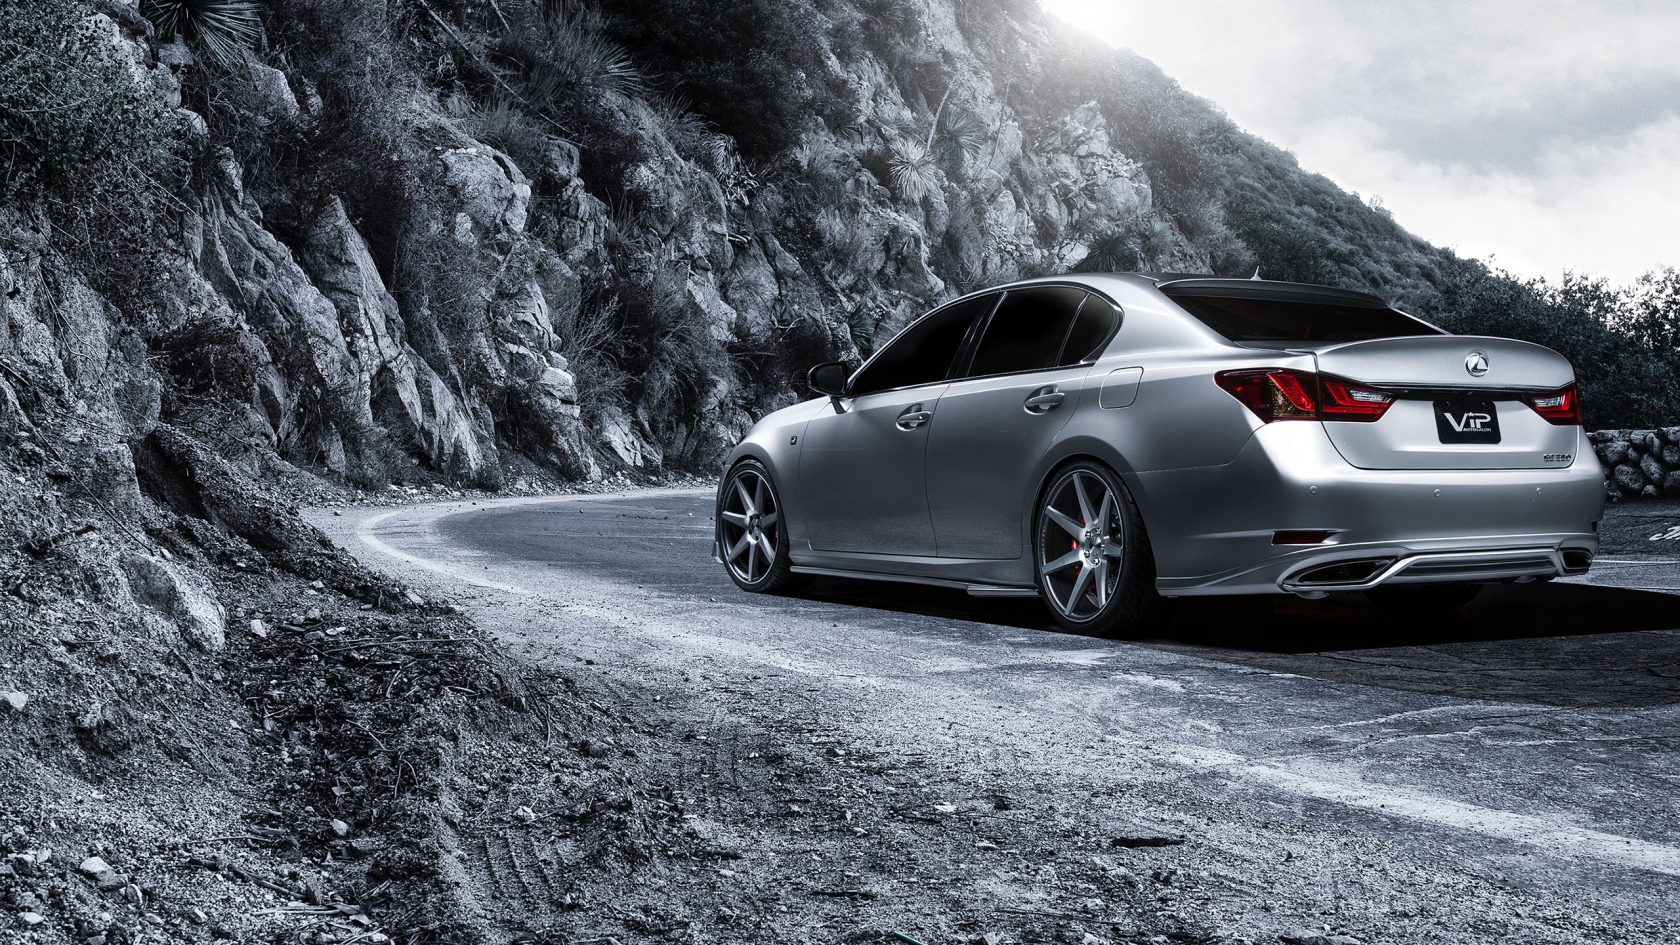 Lexus GS 350 Supercharged Rear for 1680 x 945 HDTV resolution